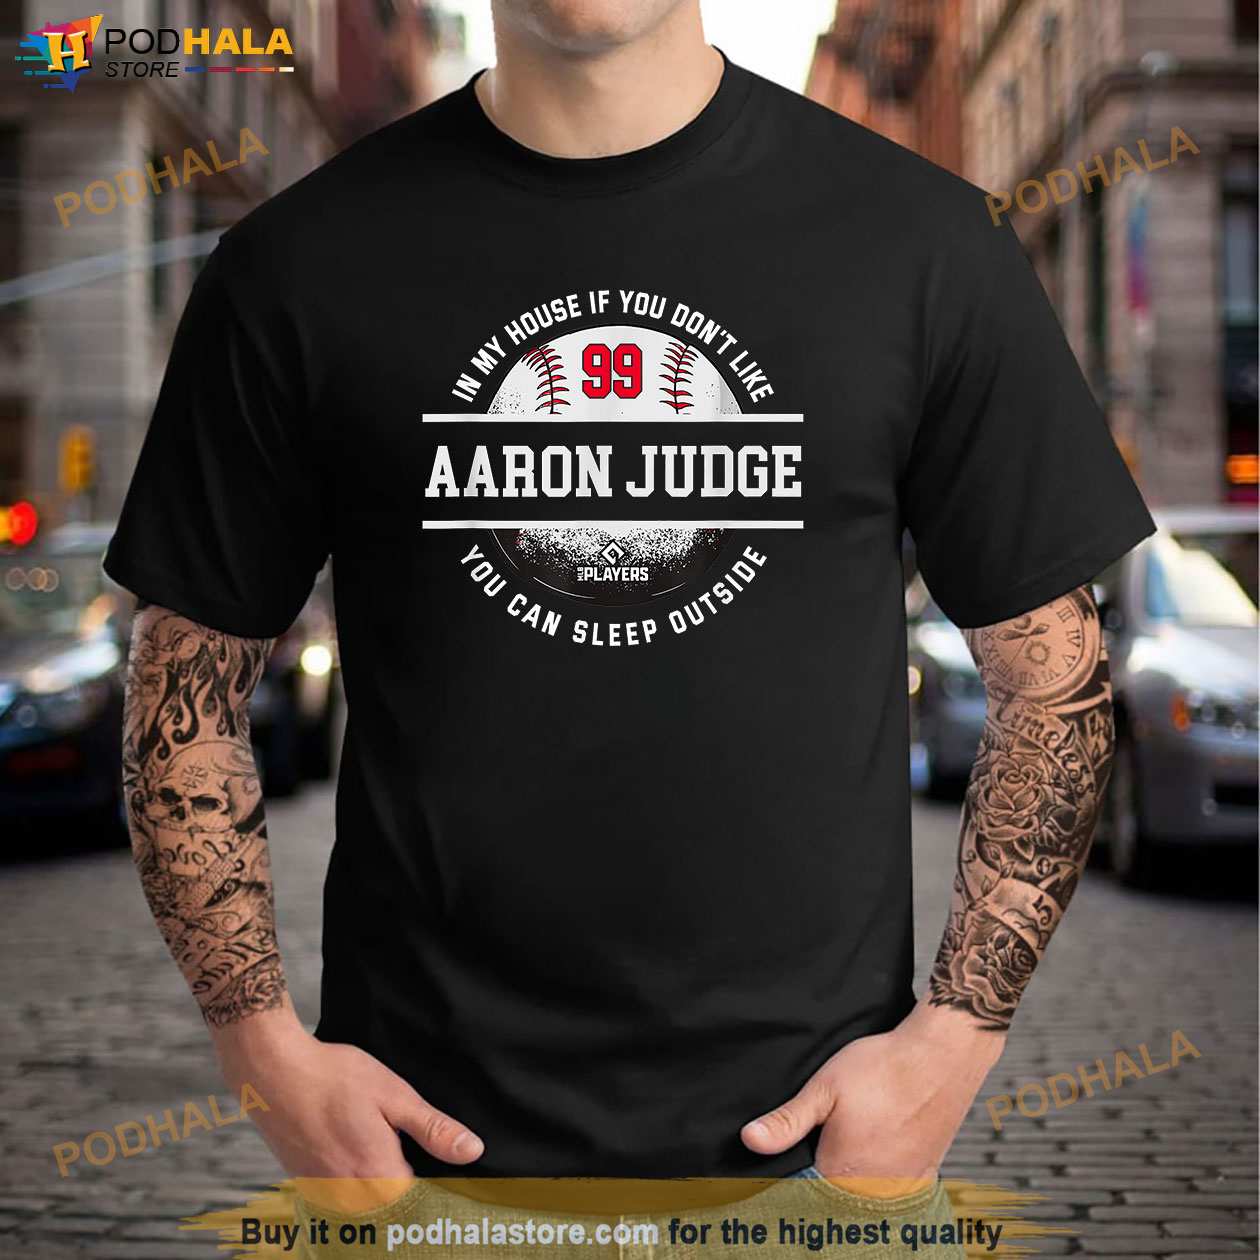 In My House Aaron Judge Fans Funny Baseball Player Shirt, Aaron